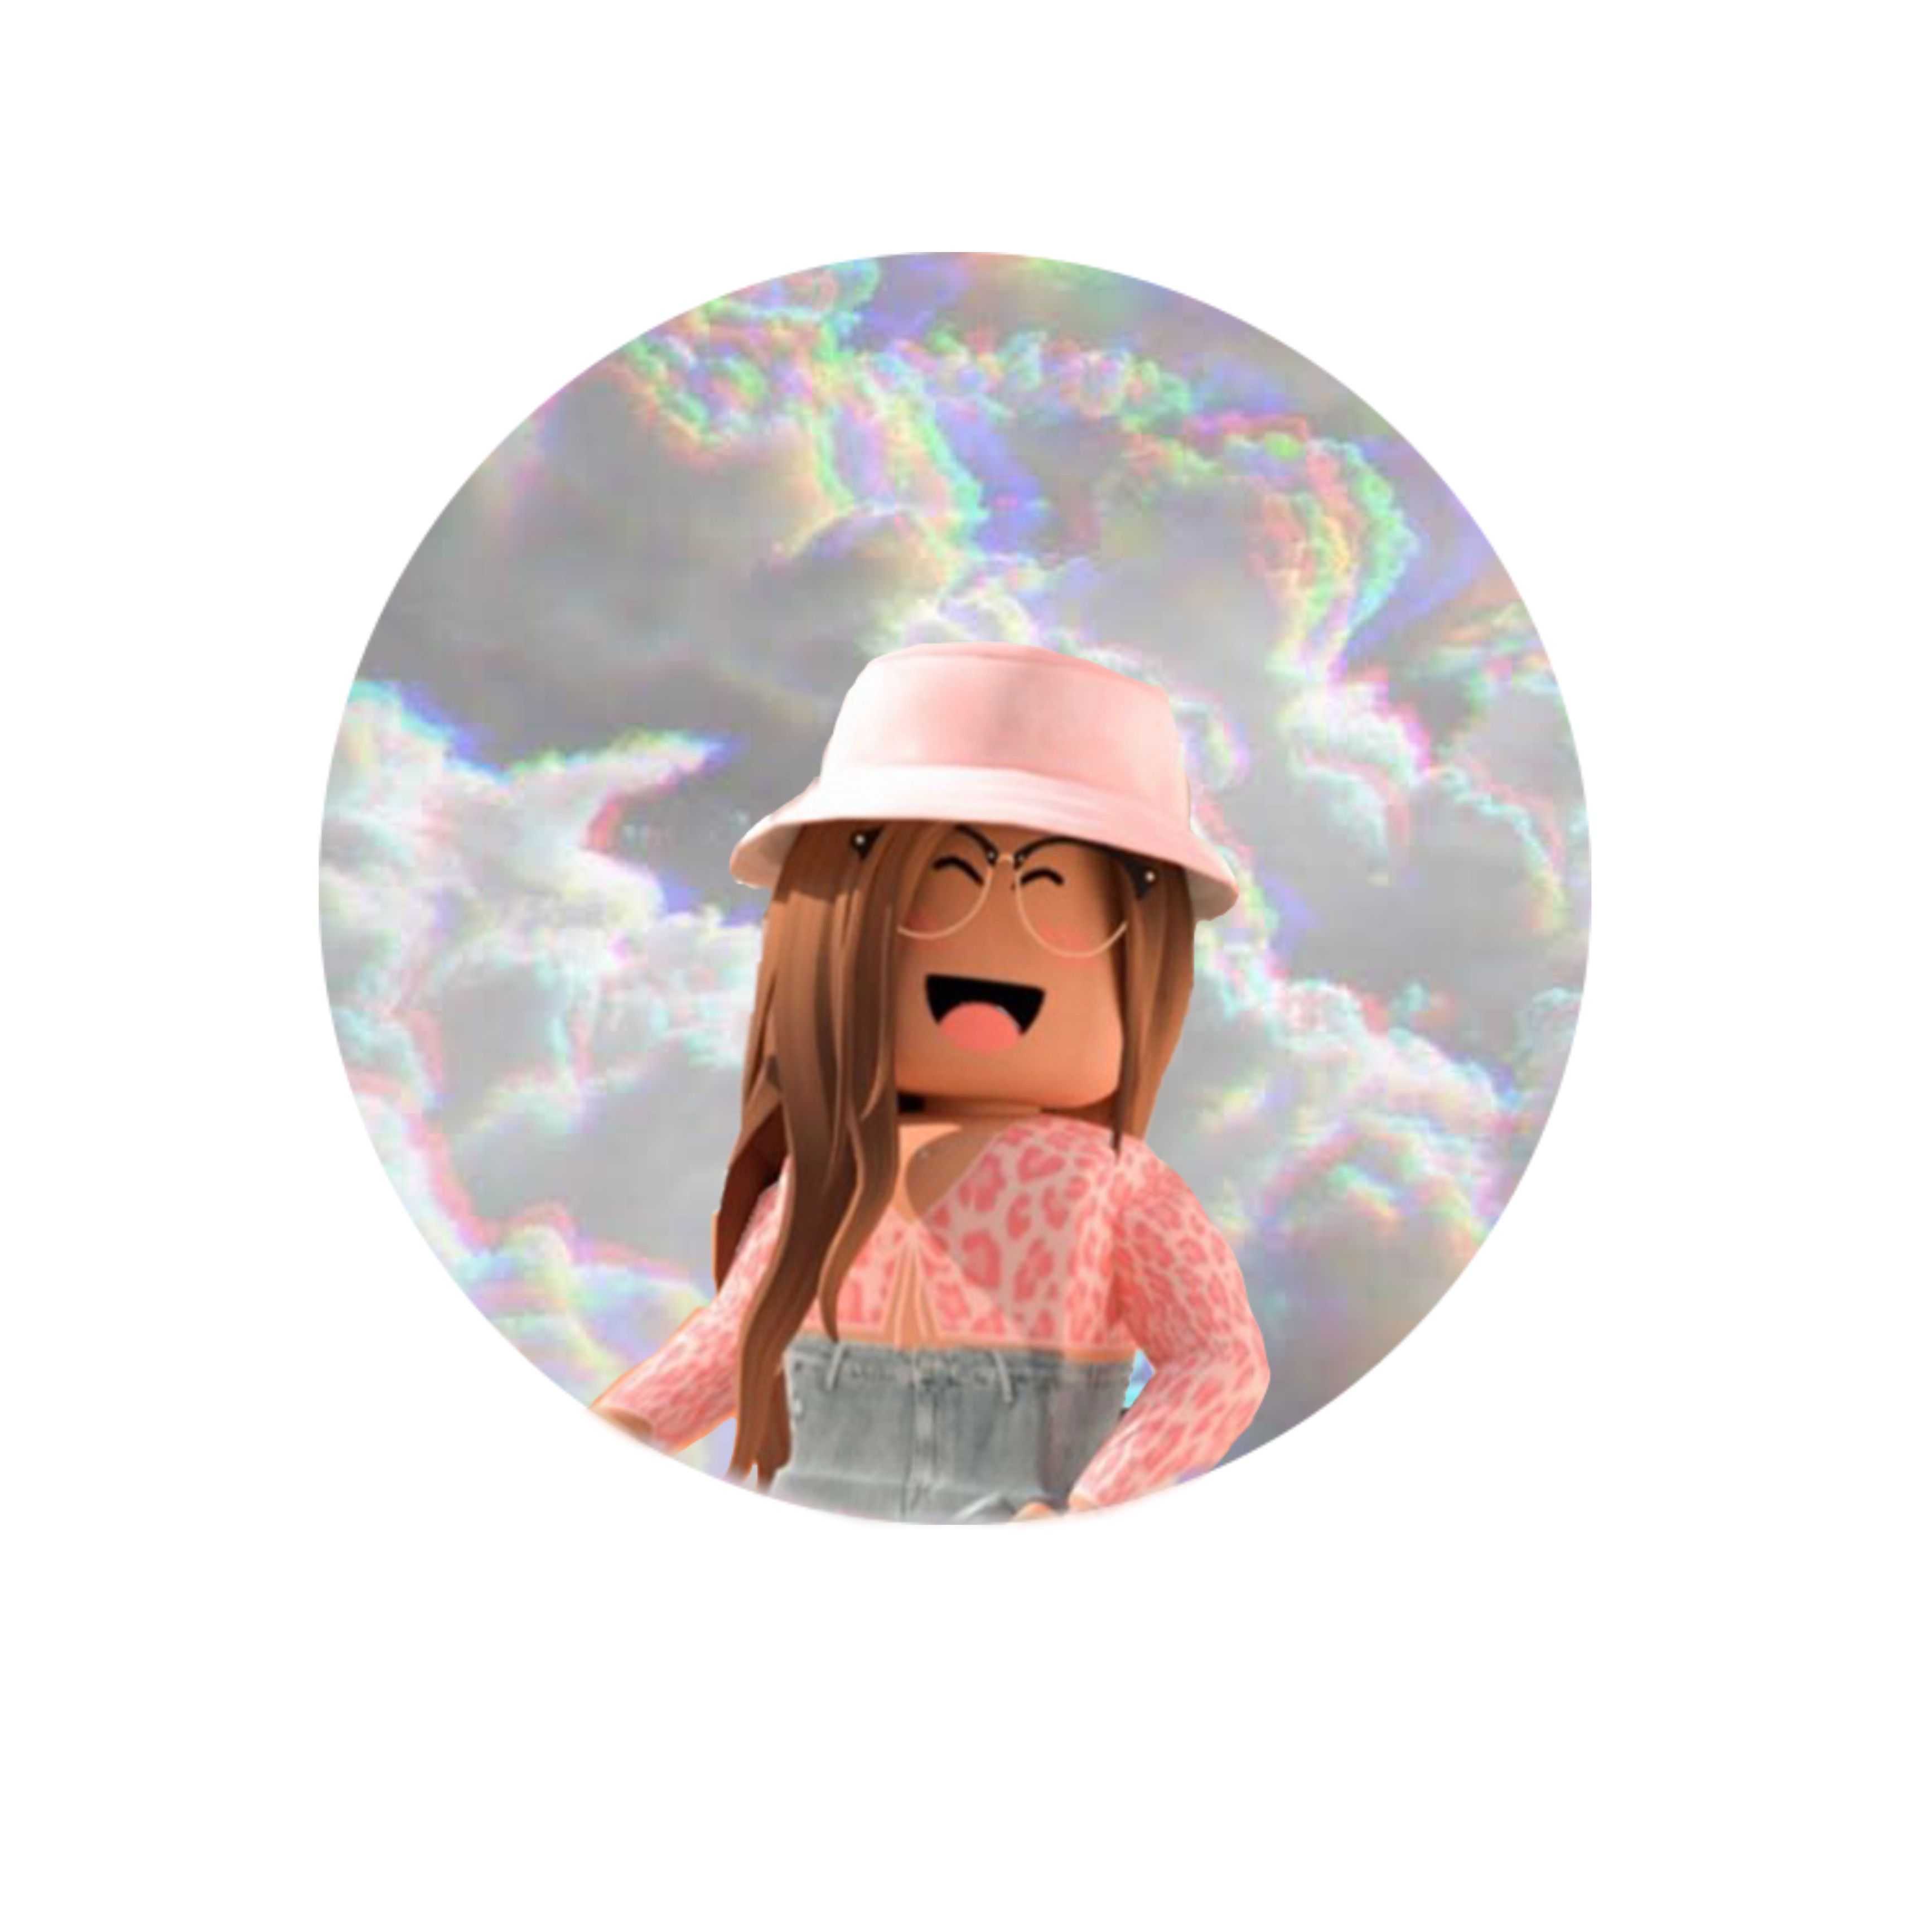 Softie Roblox Wallpapers Wallpaper Cave - girl avatar roblox softie